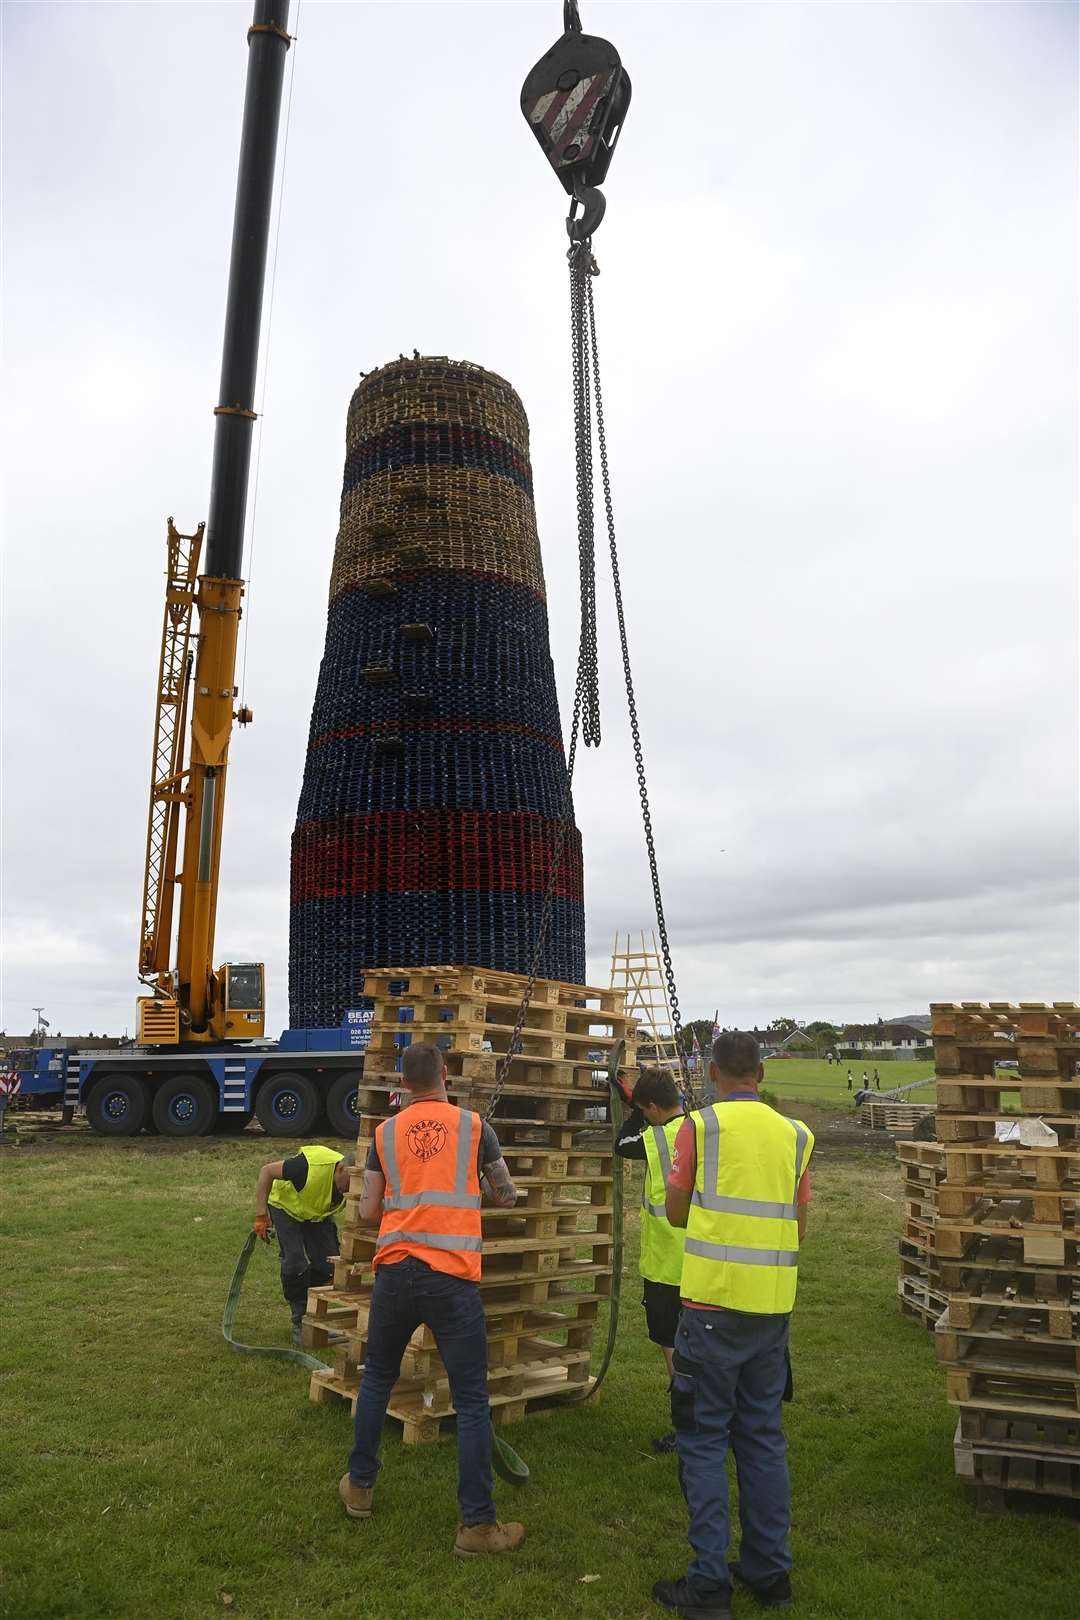 Construction on the nearby Craigyhill bonfire in Larne is to continue as builders attempt to break a world record for the highest bonfire (Mark Marlow)